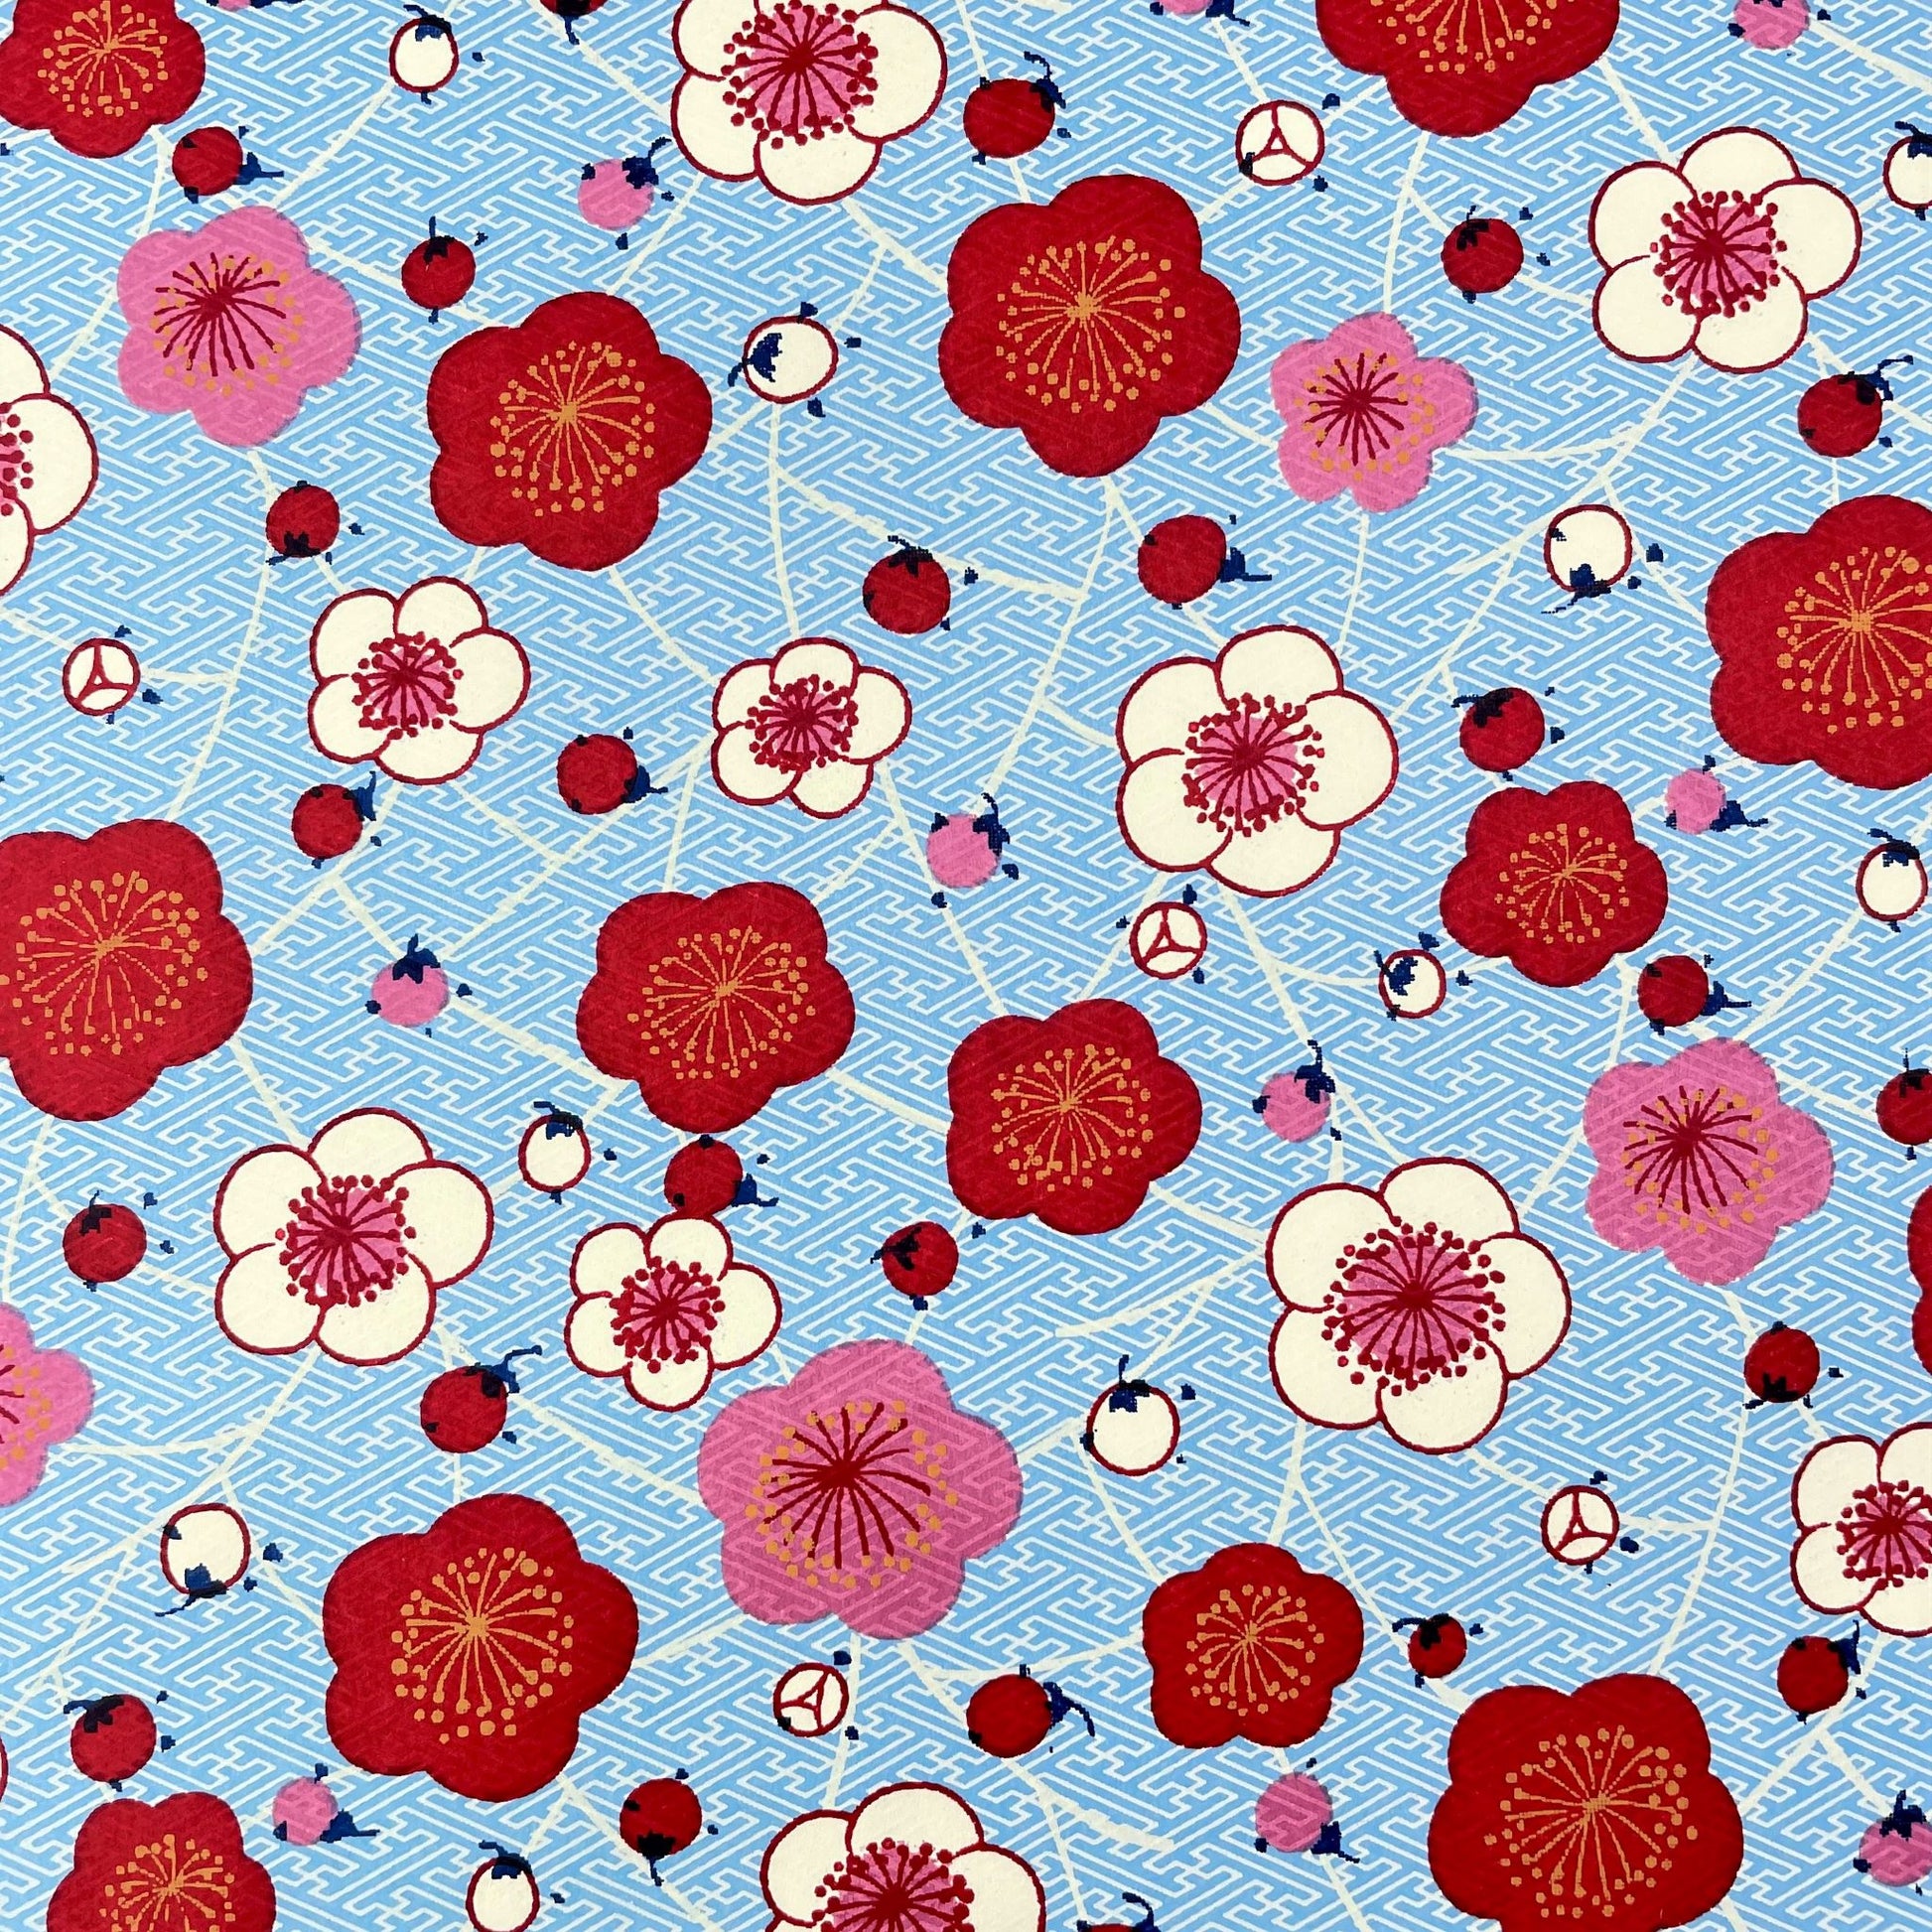 japanese silk-screen handmade paper showing red and pink plum flowers on a blue geometric backdrop